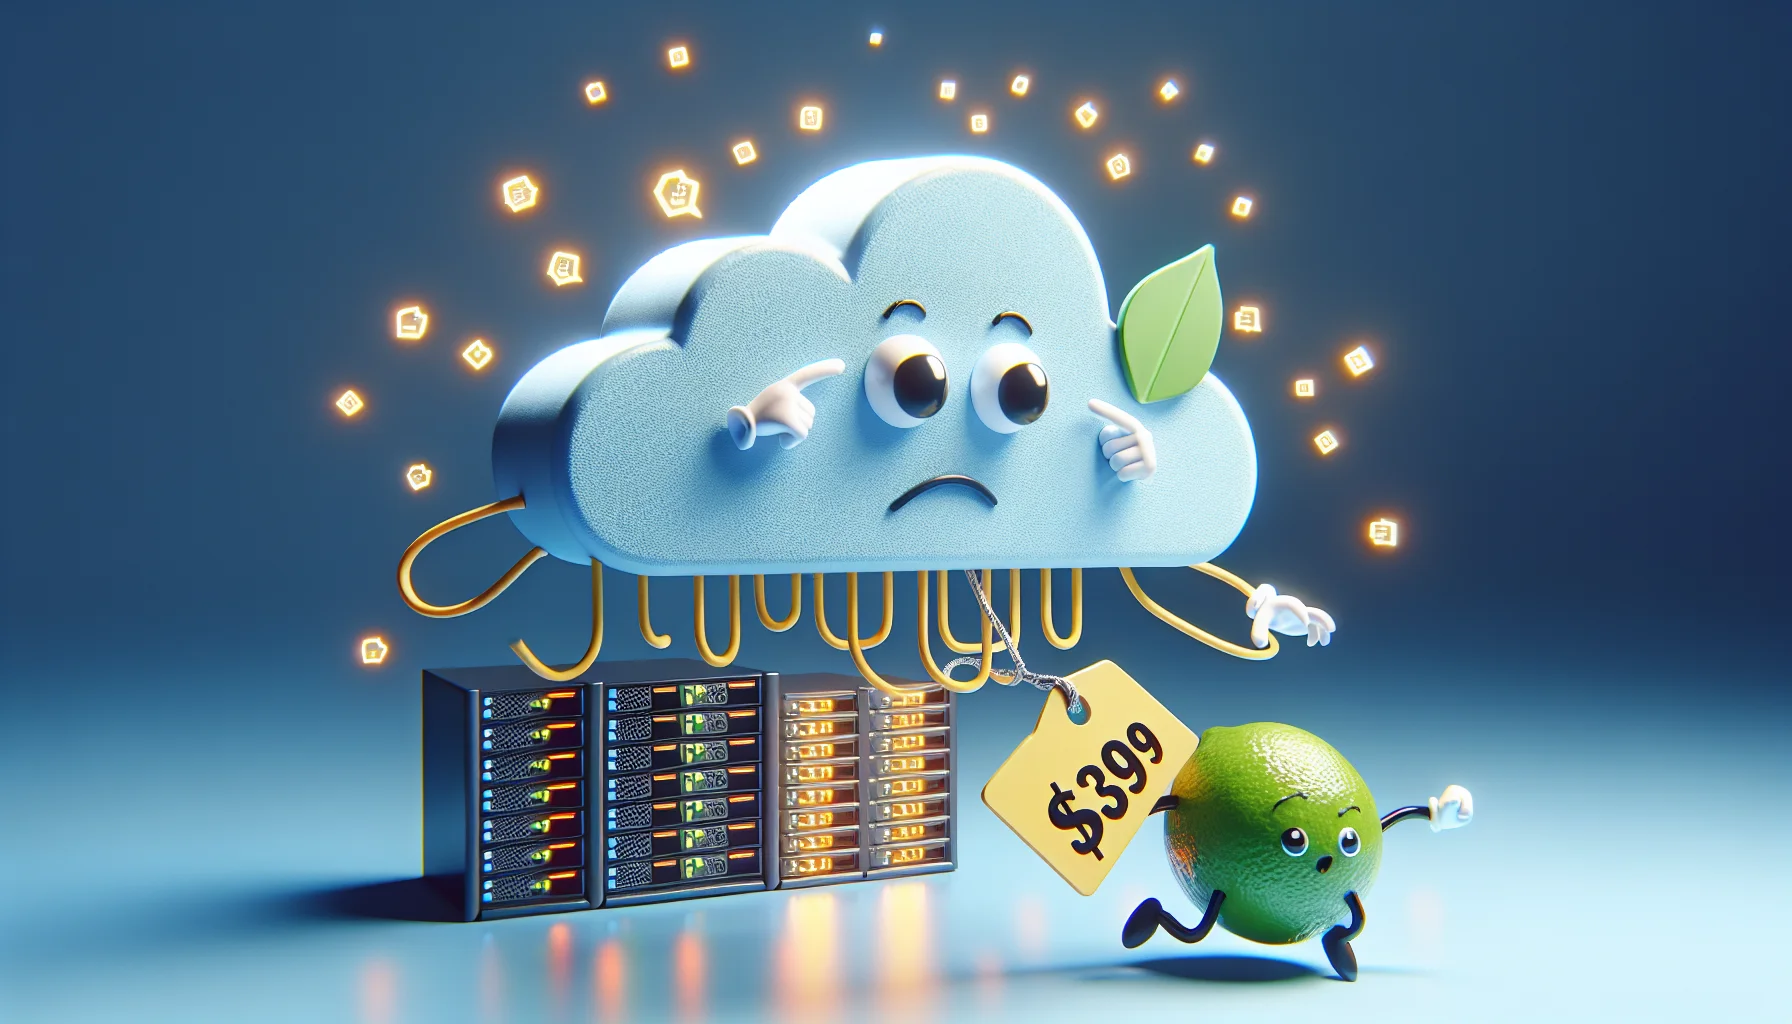 Create a humorous, appealing scene of a generic web hosting scenario, featuring a symbolic representative of a digital cloud shaped like a cheap price tag, interacting playfully with a node branch, in the shape of a lime to illustrate 'linode'. The cloud wafts above a stylized image of a server rack, glowing with busy network activity. This scene should subtly demonstrate the affordability, power, and simplicity of using a cloud-based web hosting service. The overall tone should be enticing and fun, appealing to web developers and businesses of all sizes.